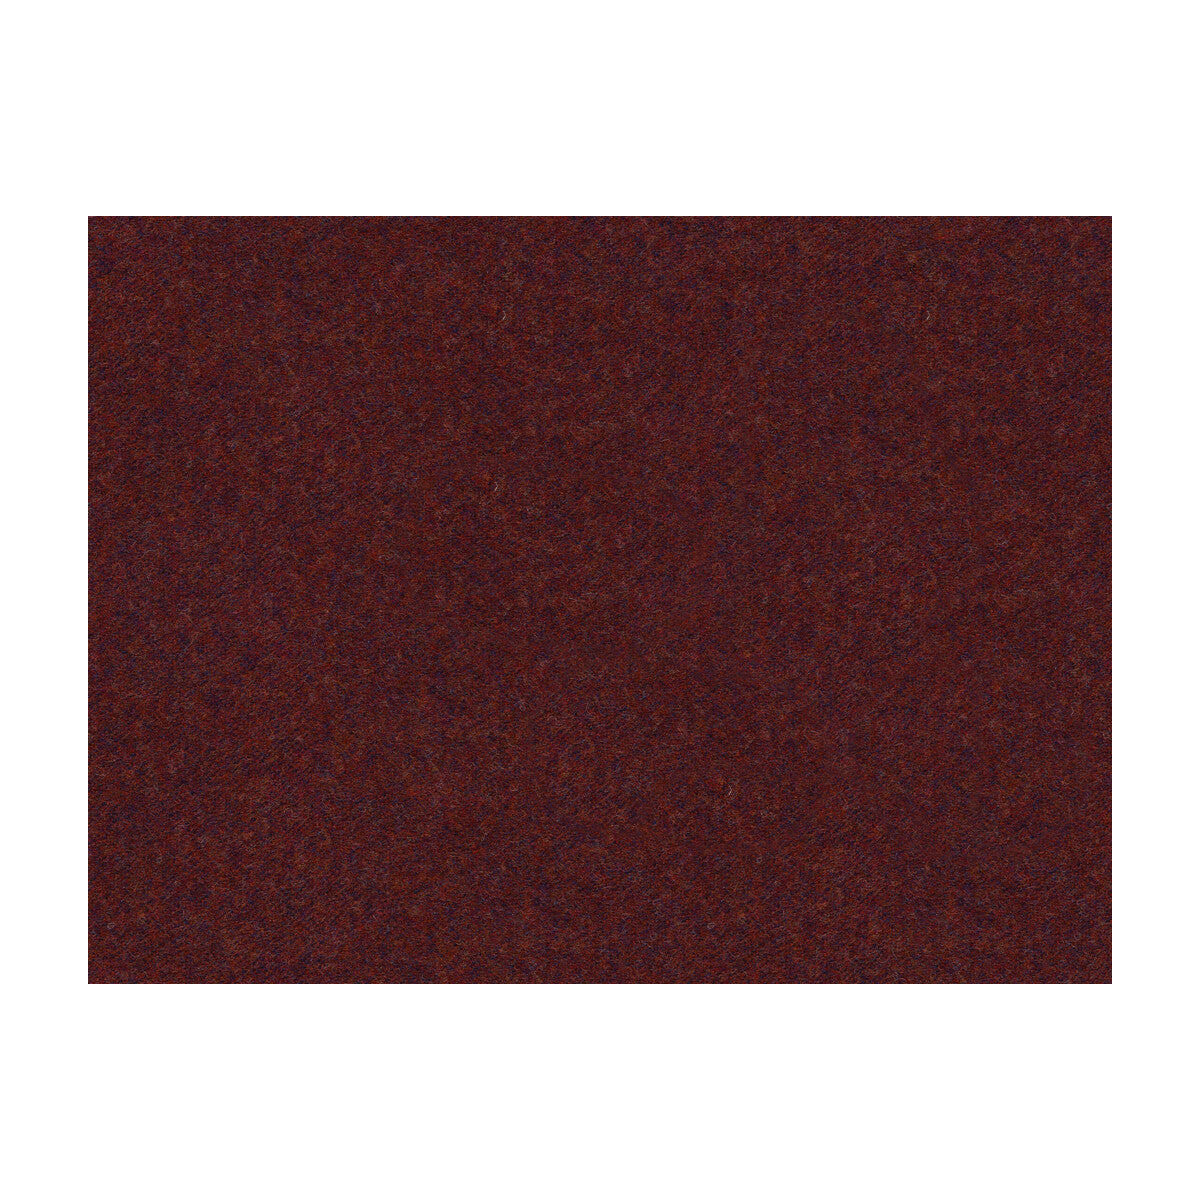 Chevalier Wool fabric in raisin color - pattern 8013149.519.0 - by Brunschwig &amp; Fils